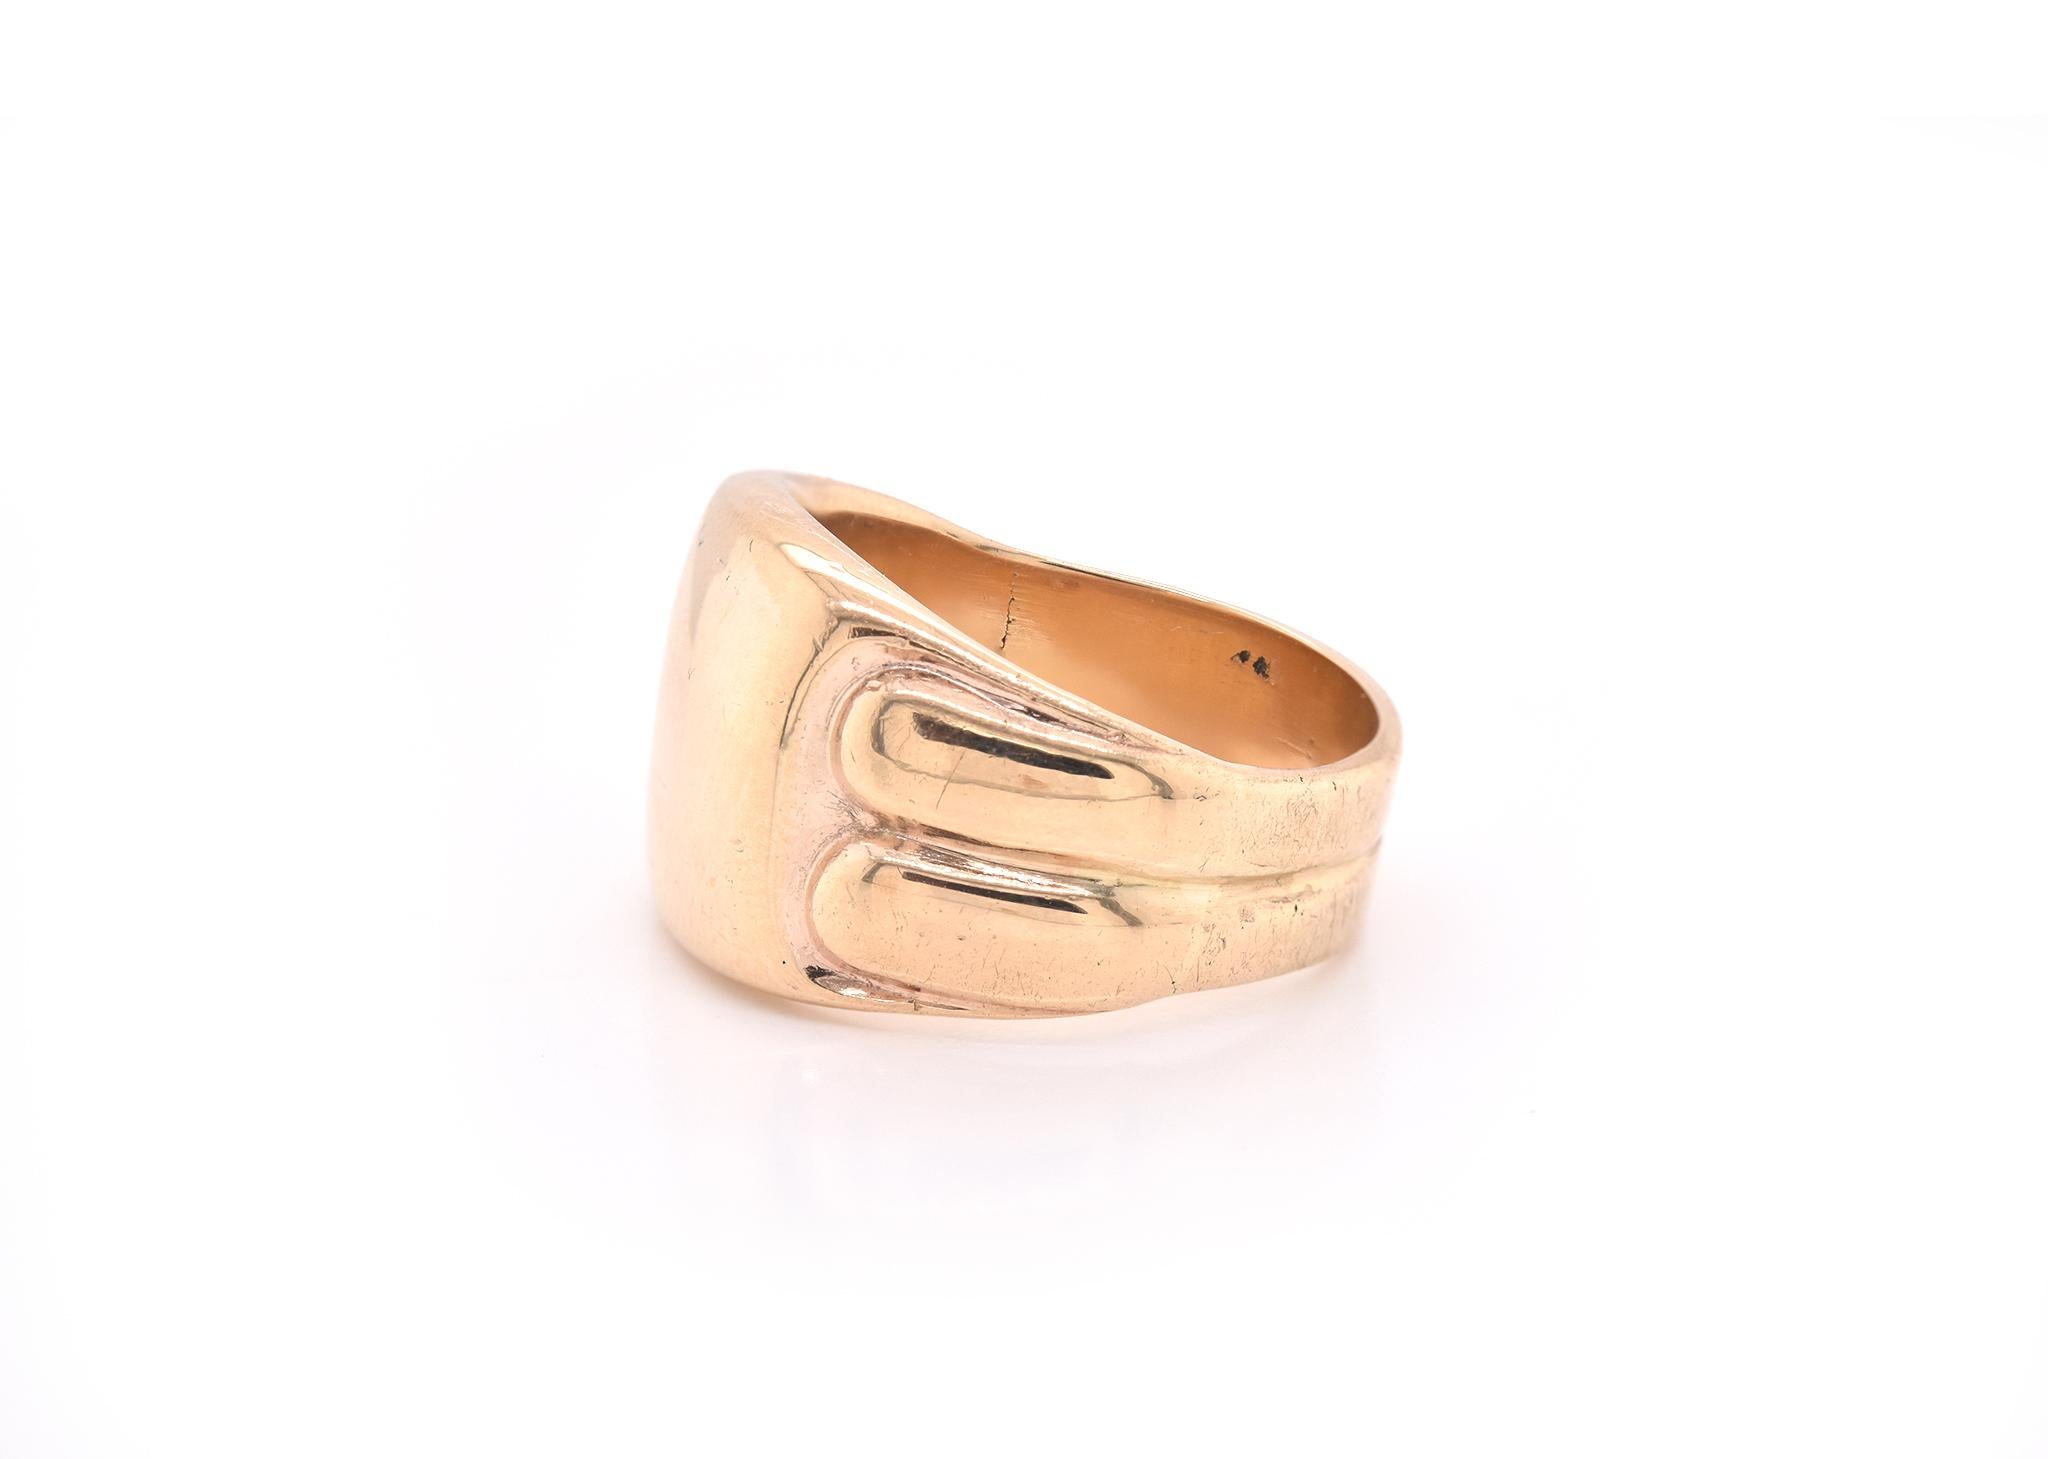 10 Karat Yellow Gold Signet Ring In Excellent Condition For Sale In Scottsdale, AZ